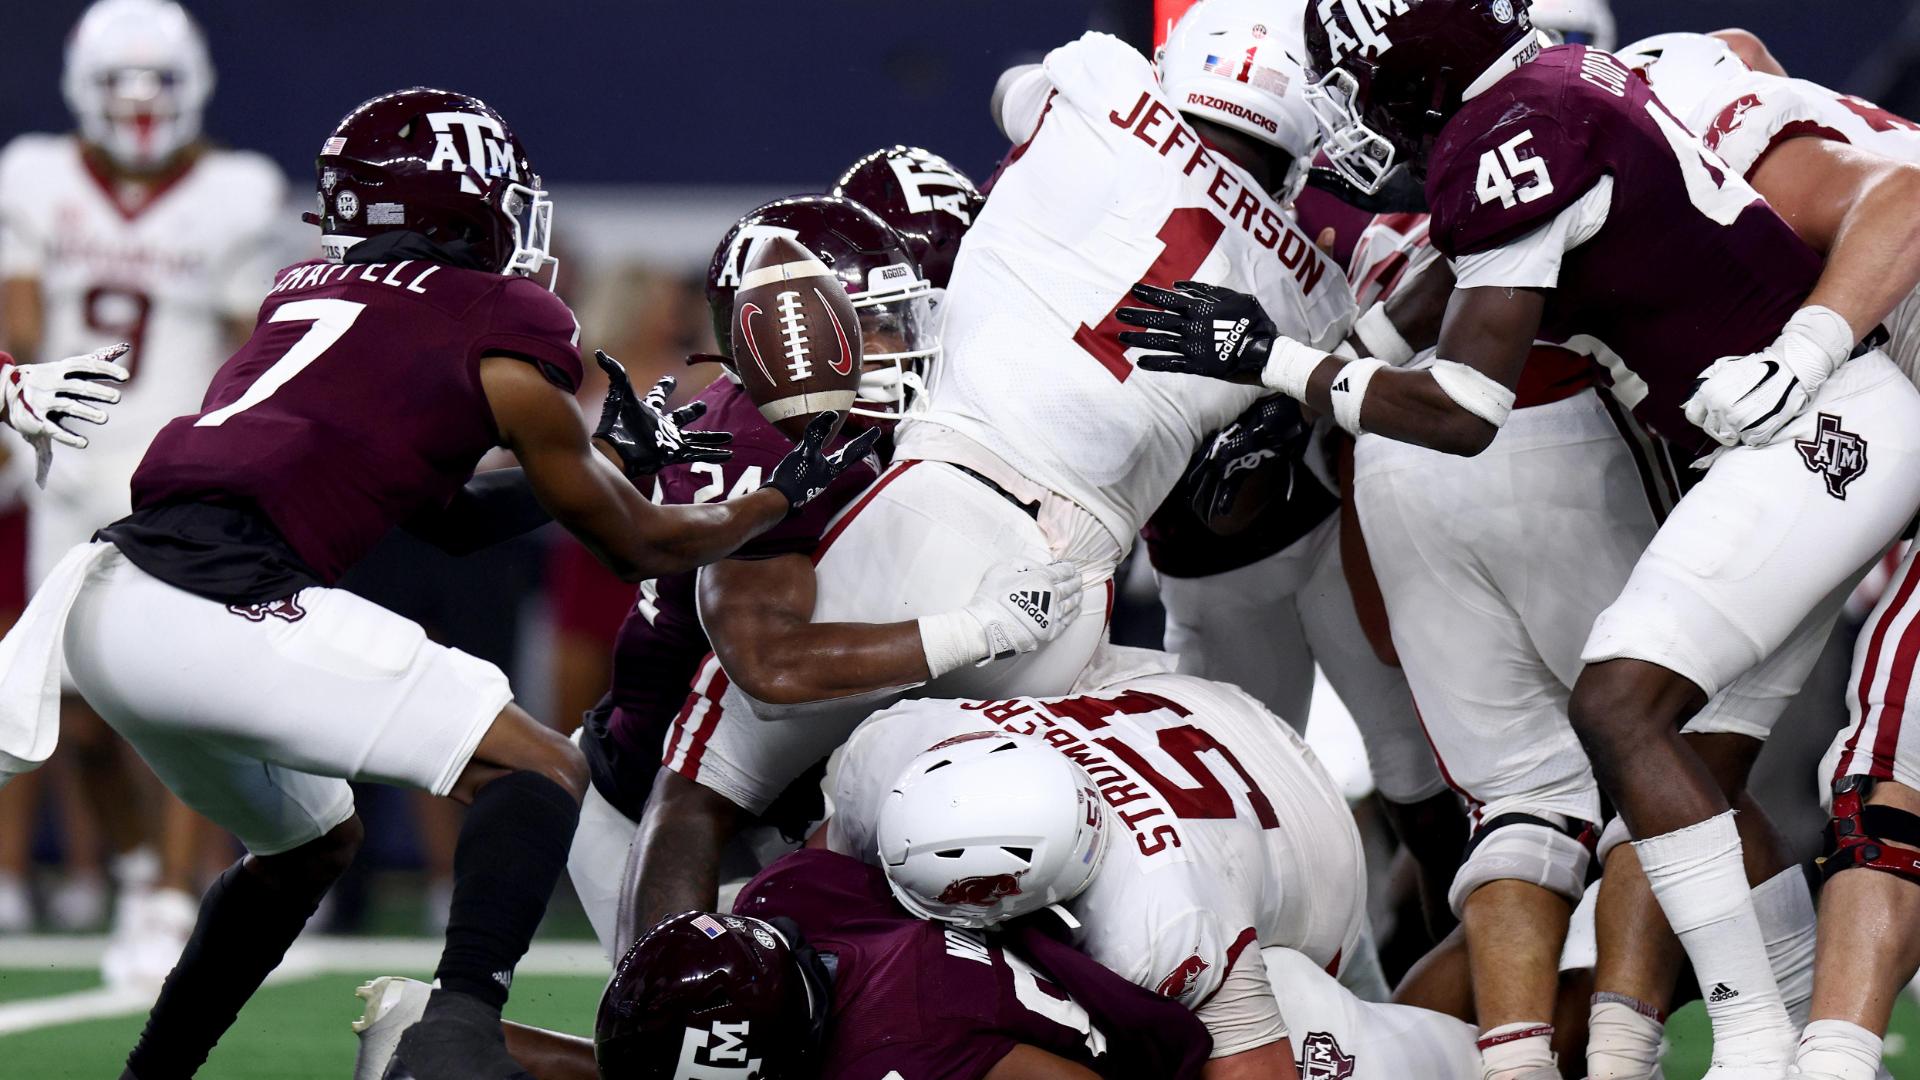 Texas A&M's defense with one of the wildest touchdowns of the season